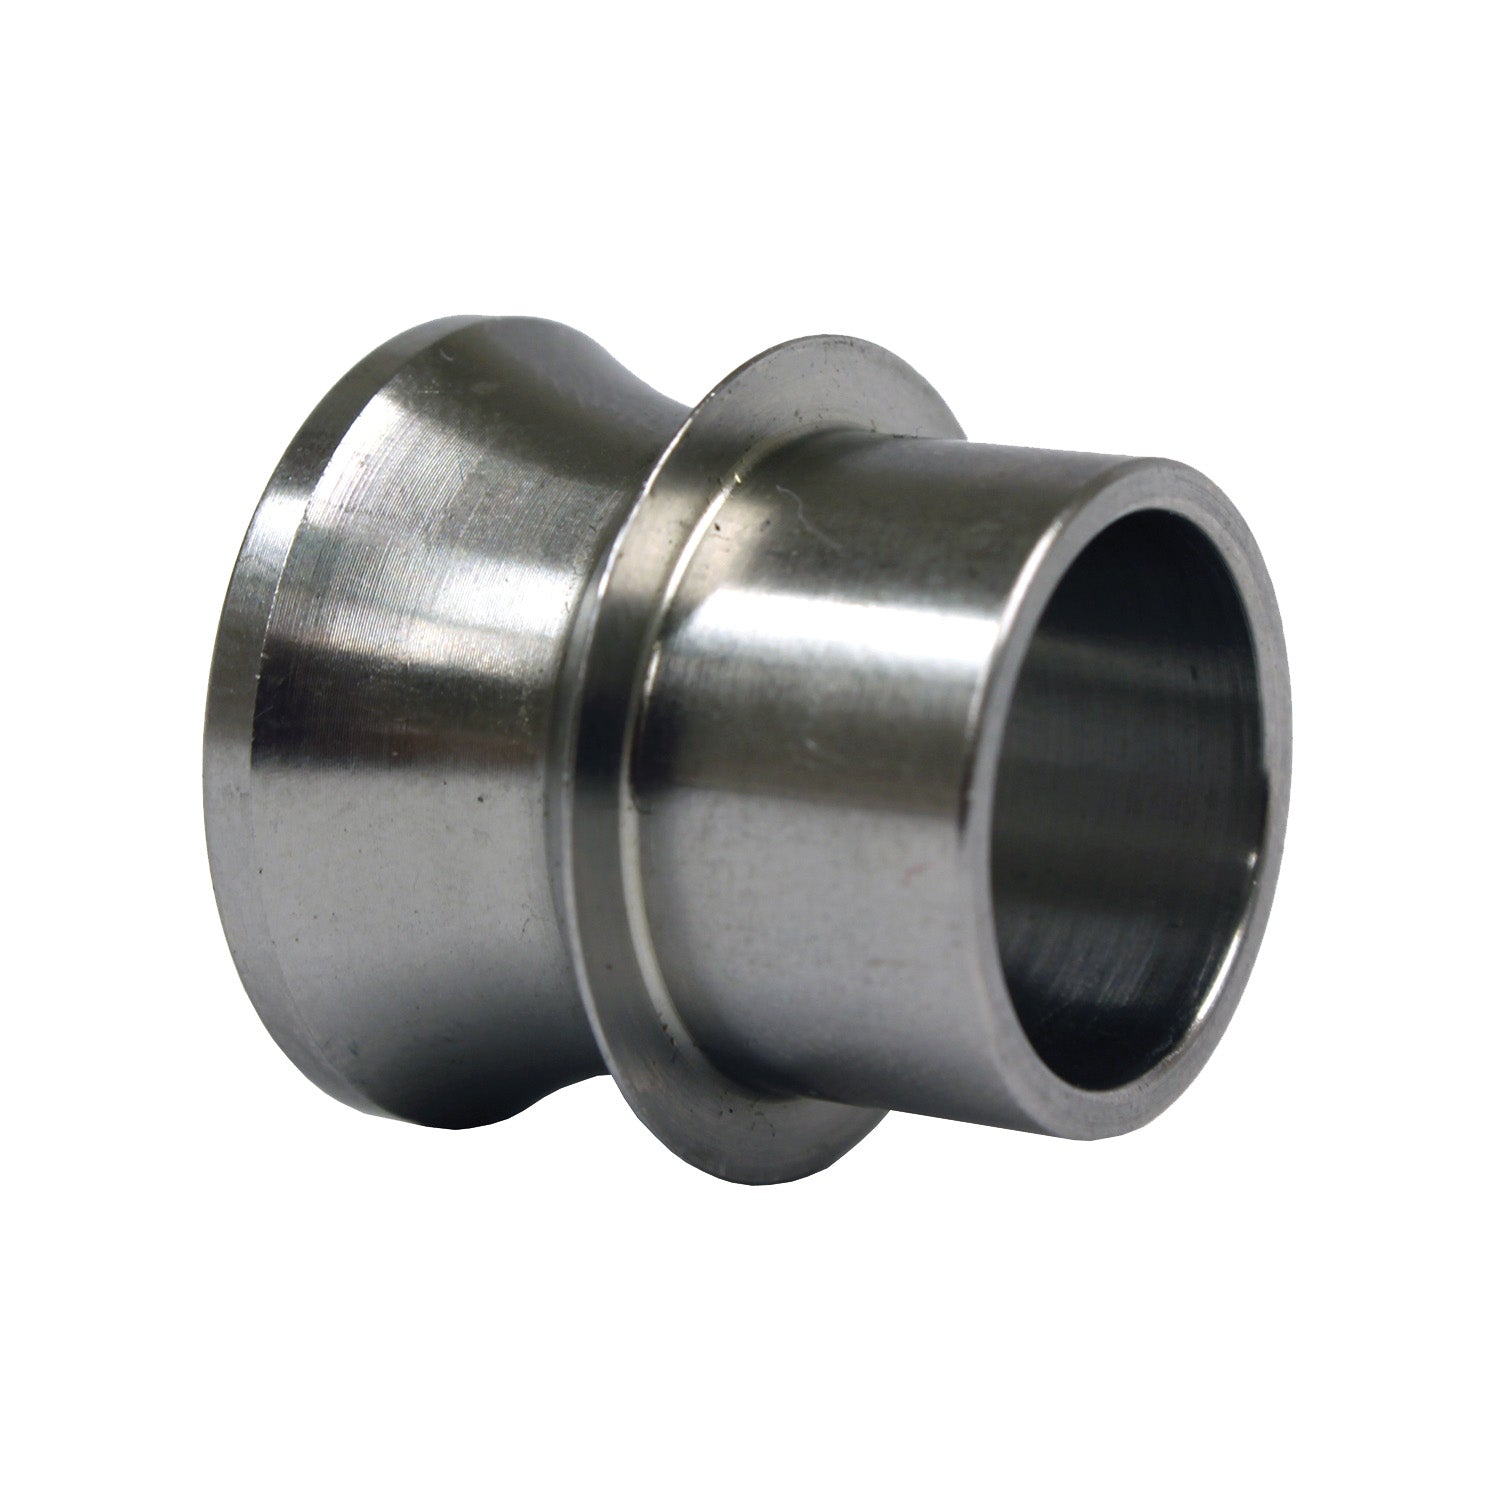 QA1 SN16-913 High Misalignment Spacer, 1 inch Od Ss, .563 inch X 2.625 inch Total Width